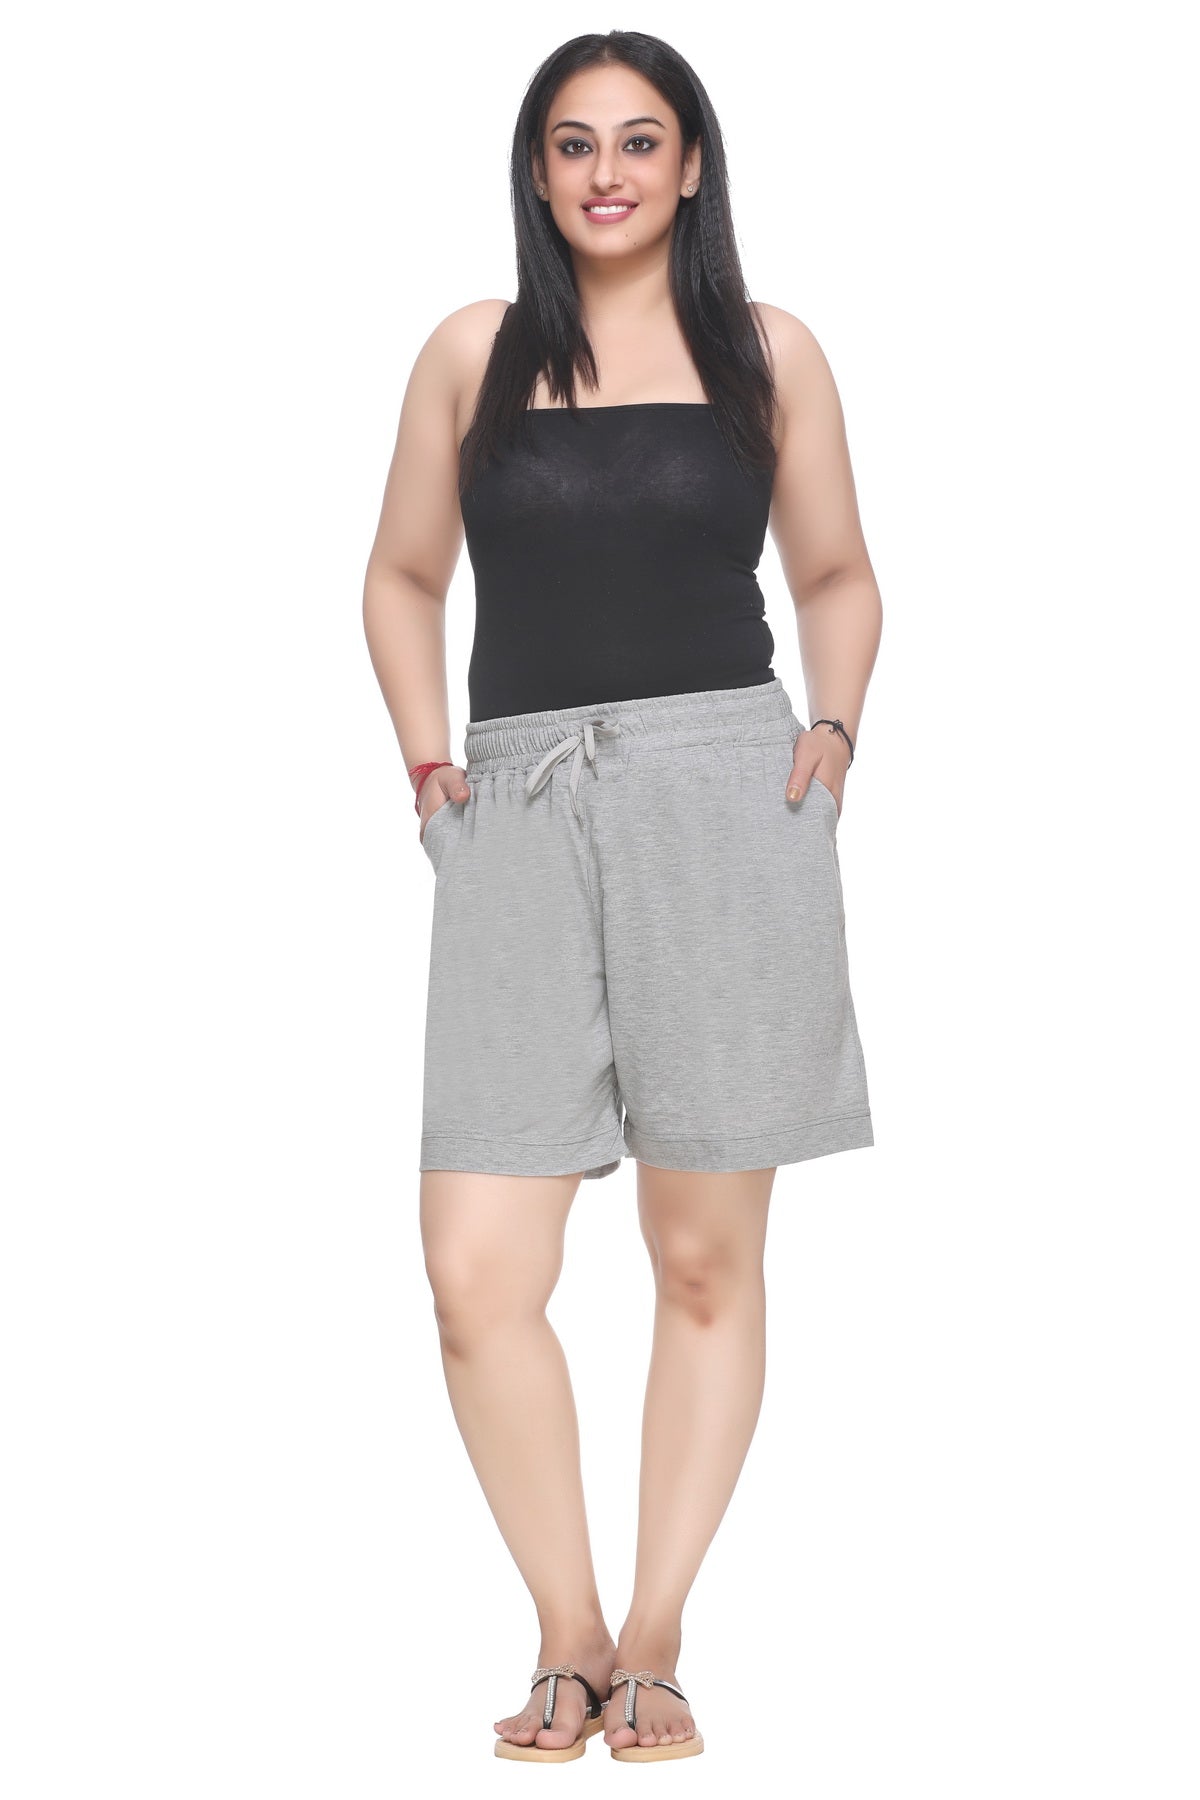 CUPID Plus Size Comfortable Plain Barmuda/Shorts for Night Wear, Casual Wear for Women (Grey) freeshipping - Cupid Clothings